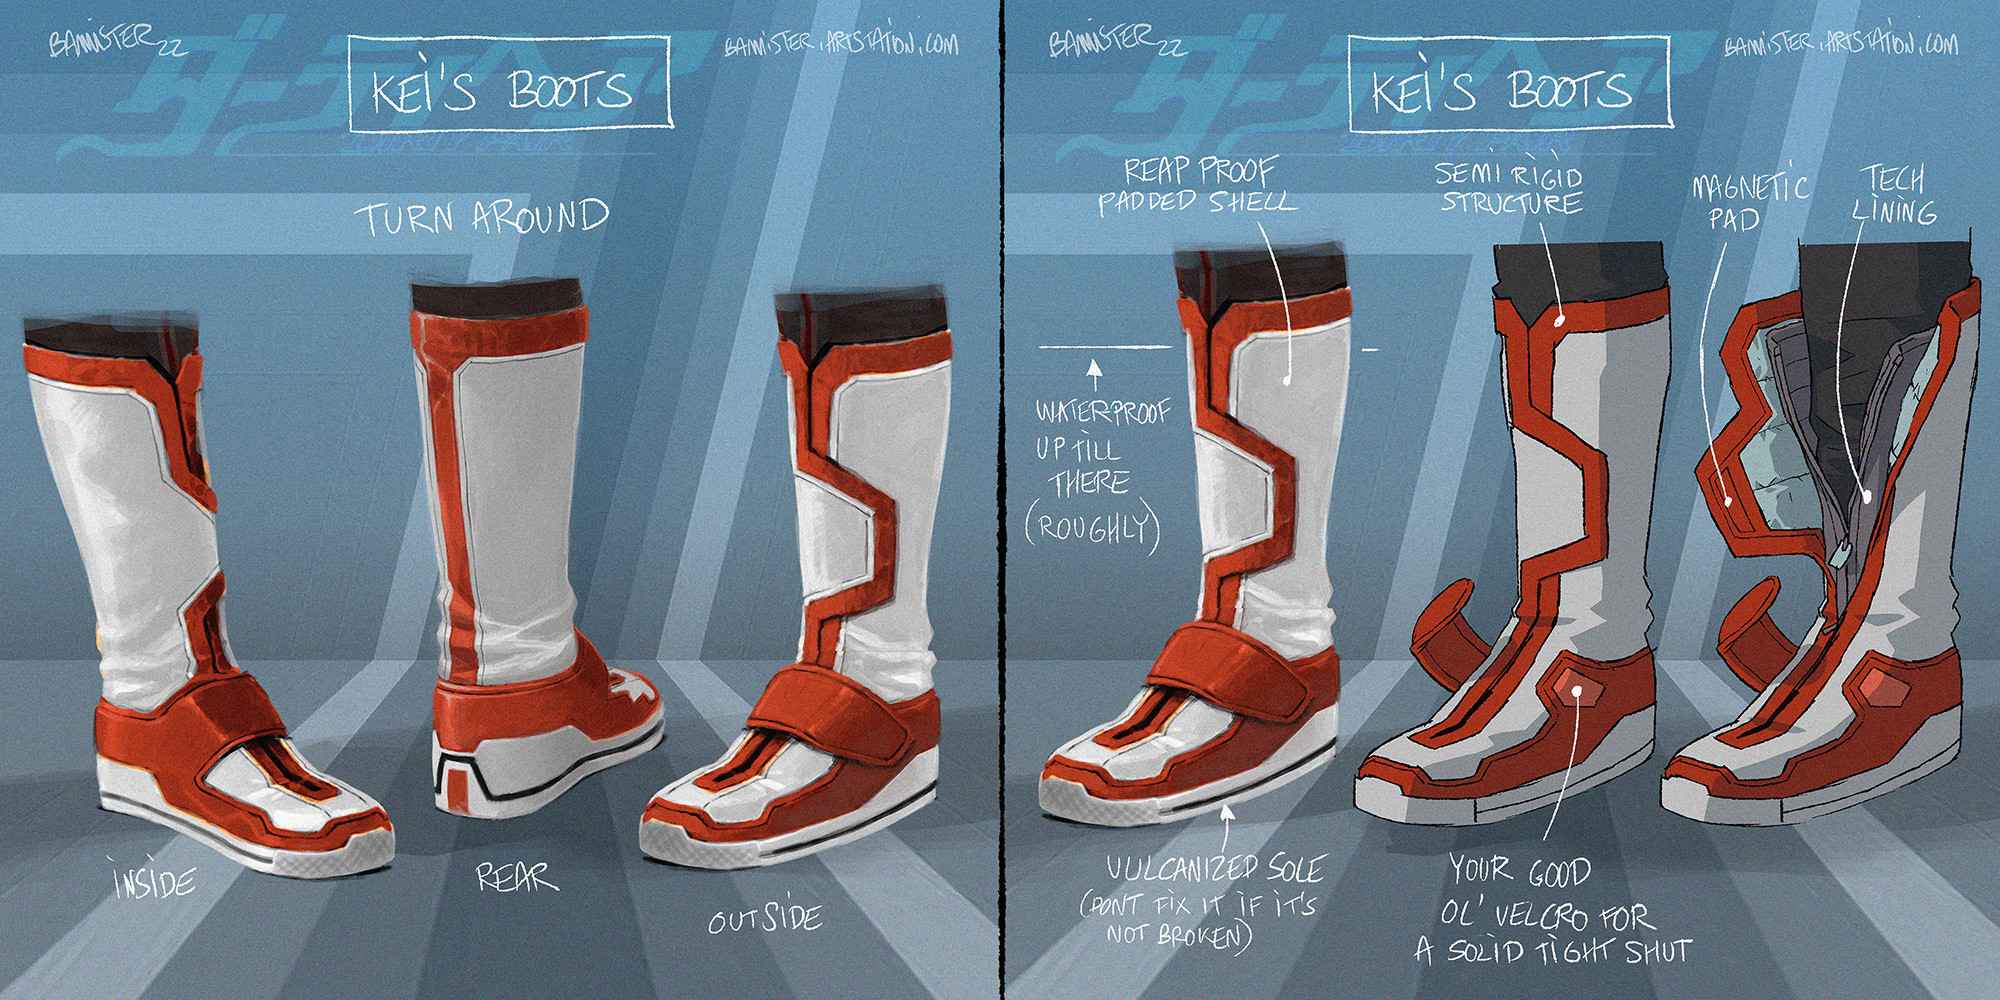 Kei &amp; Yuri's boot designs. Updating them with more "realistic" features and modern lines.